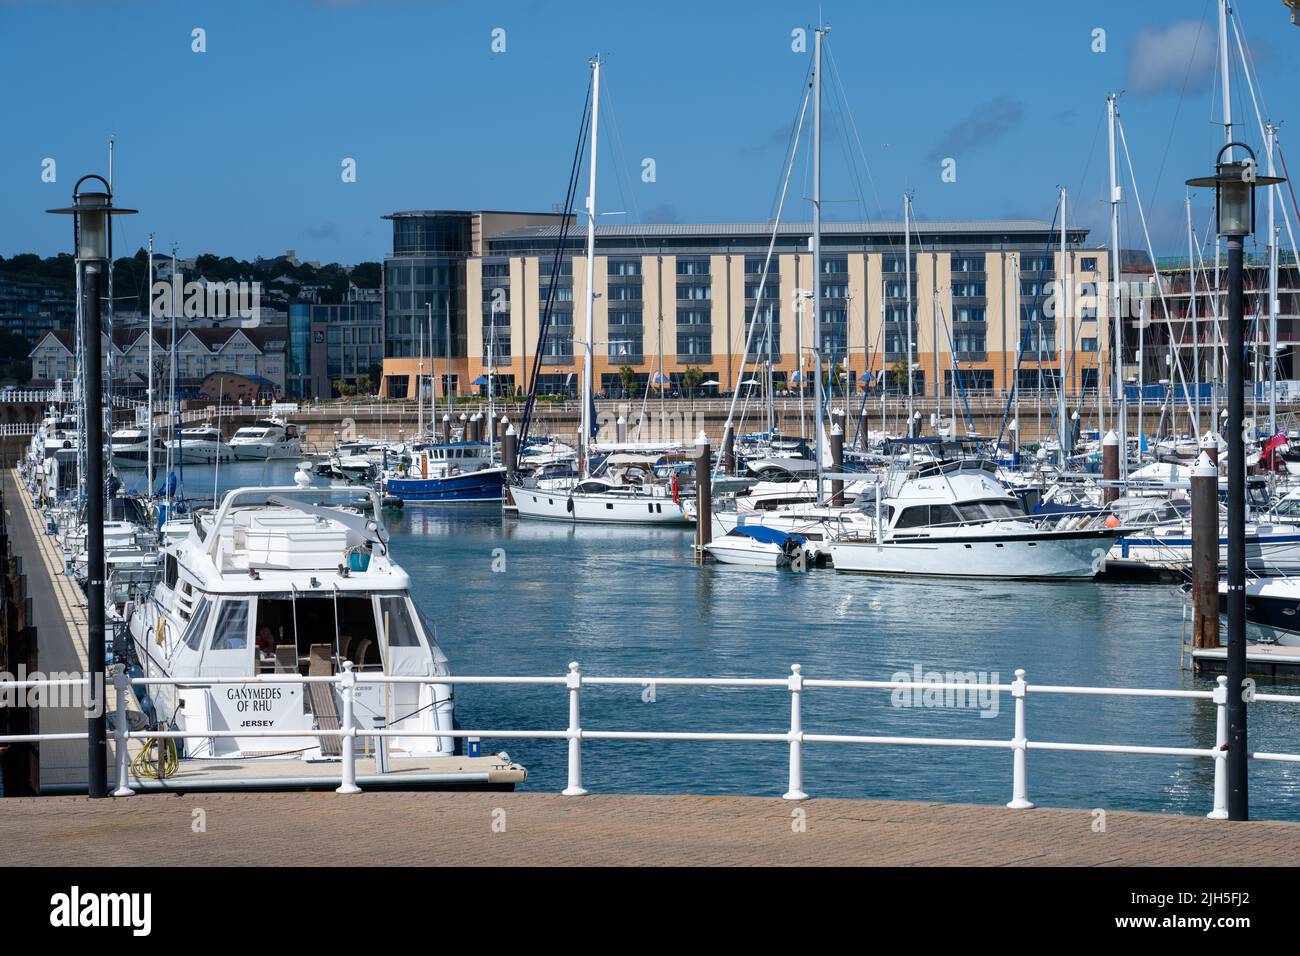 Boats moored in Elizabeth Marina, St Helier harbour of the British Crown Dependency of Jersey, Channel Islands, British Isles. Stock Photo